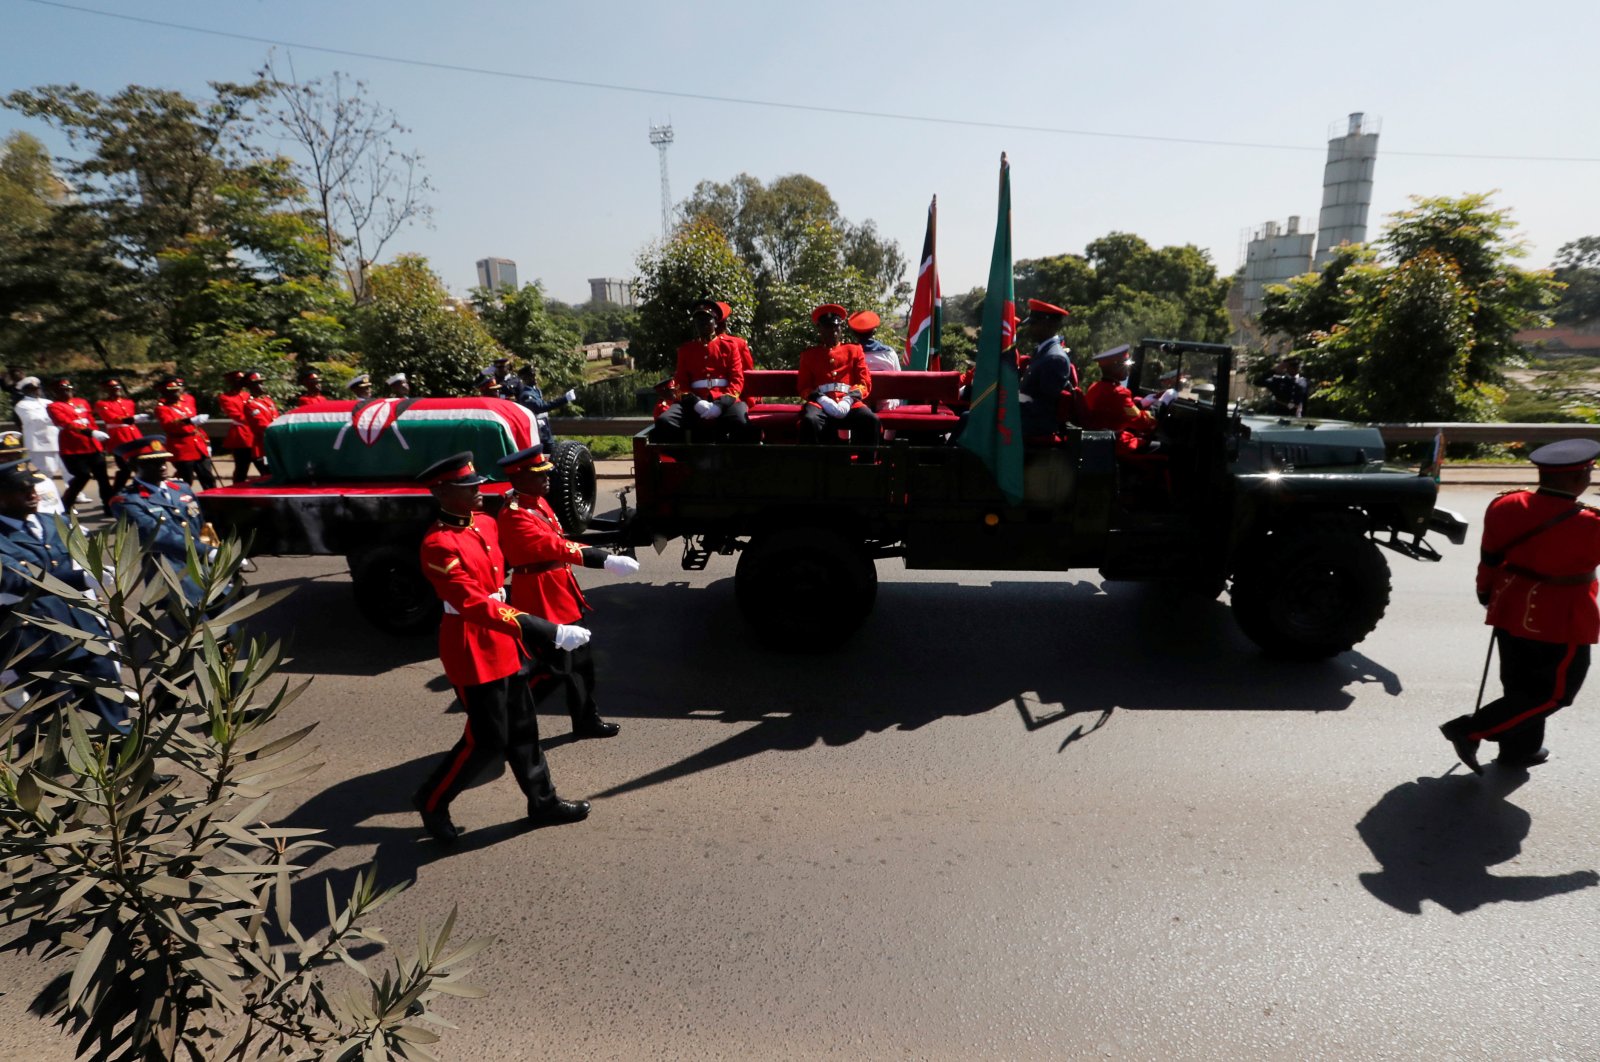 Military officers escort a gun carriage carrying the coffin of late President Daniel Arap Moi during a state funeral procession to Nyayo National Stadium, the venue of the national memorial service, Nairobi, Kenya, Feb. 11, 2020. (Reuters Photo)